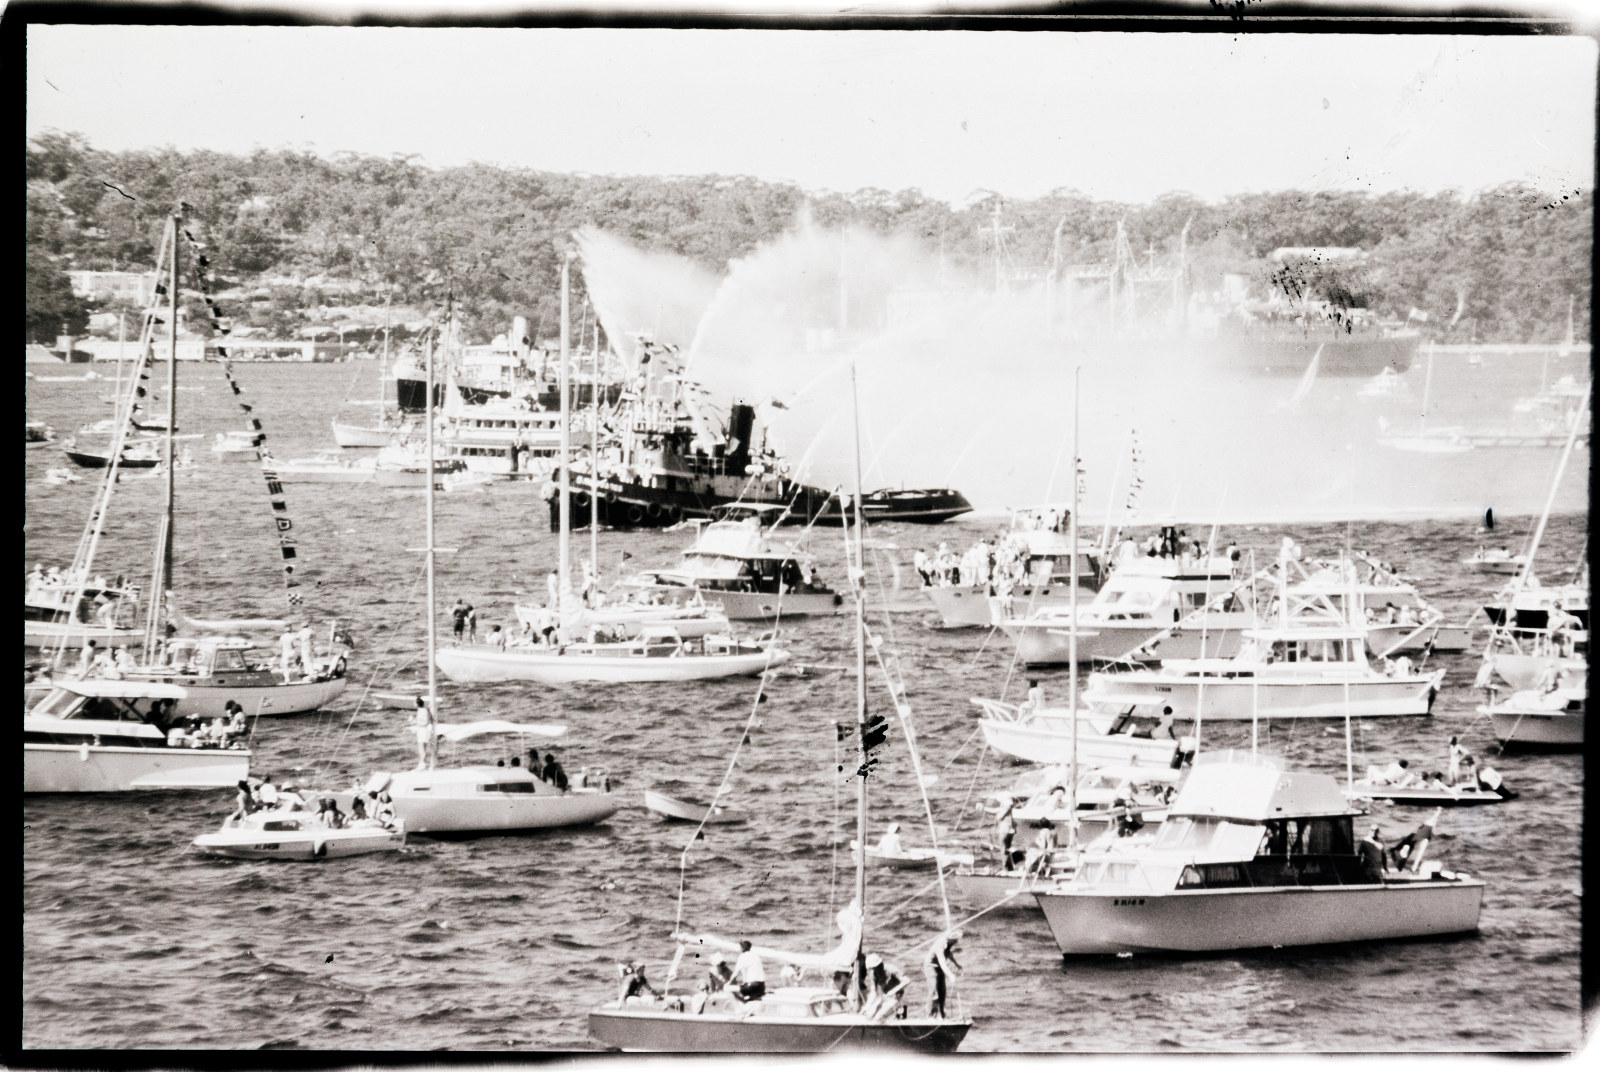 Fireboat spraying water jets and a flotilla of pleasure craft on the harbour during the opening festivities for the Sydney Opera House, 20th October 1973.